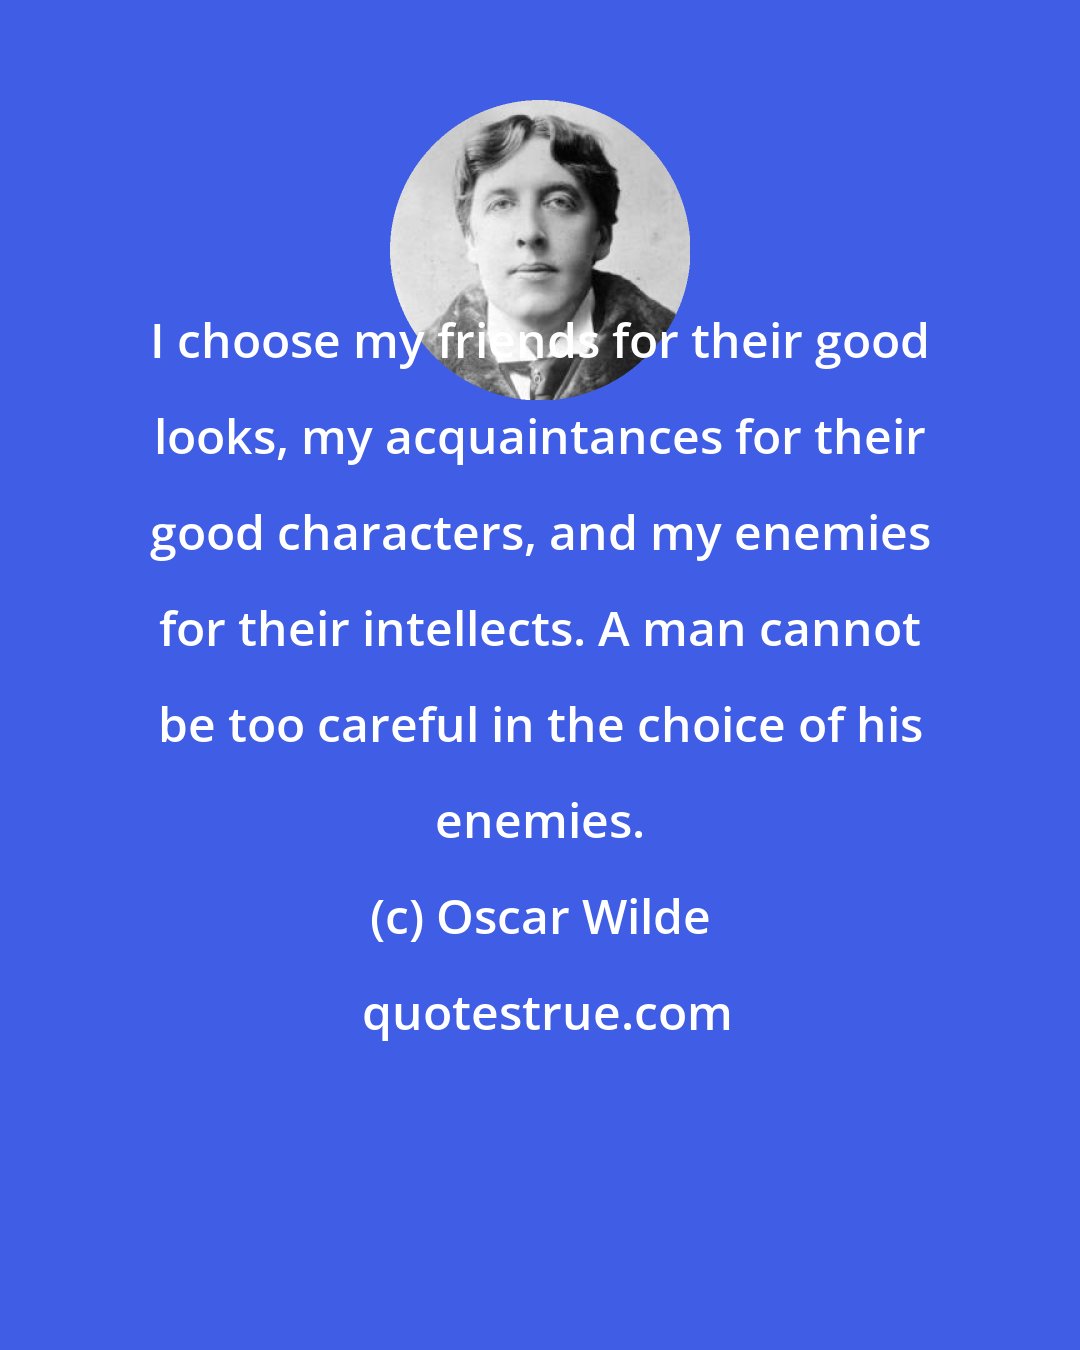 Oscar Wilde: I choose my friends for their good looks, my acquaintances for their good characters, and my enemies for their intellects. A man cannot be too careful in the choice of his enemies.